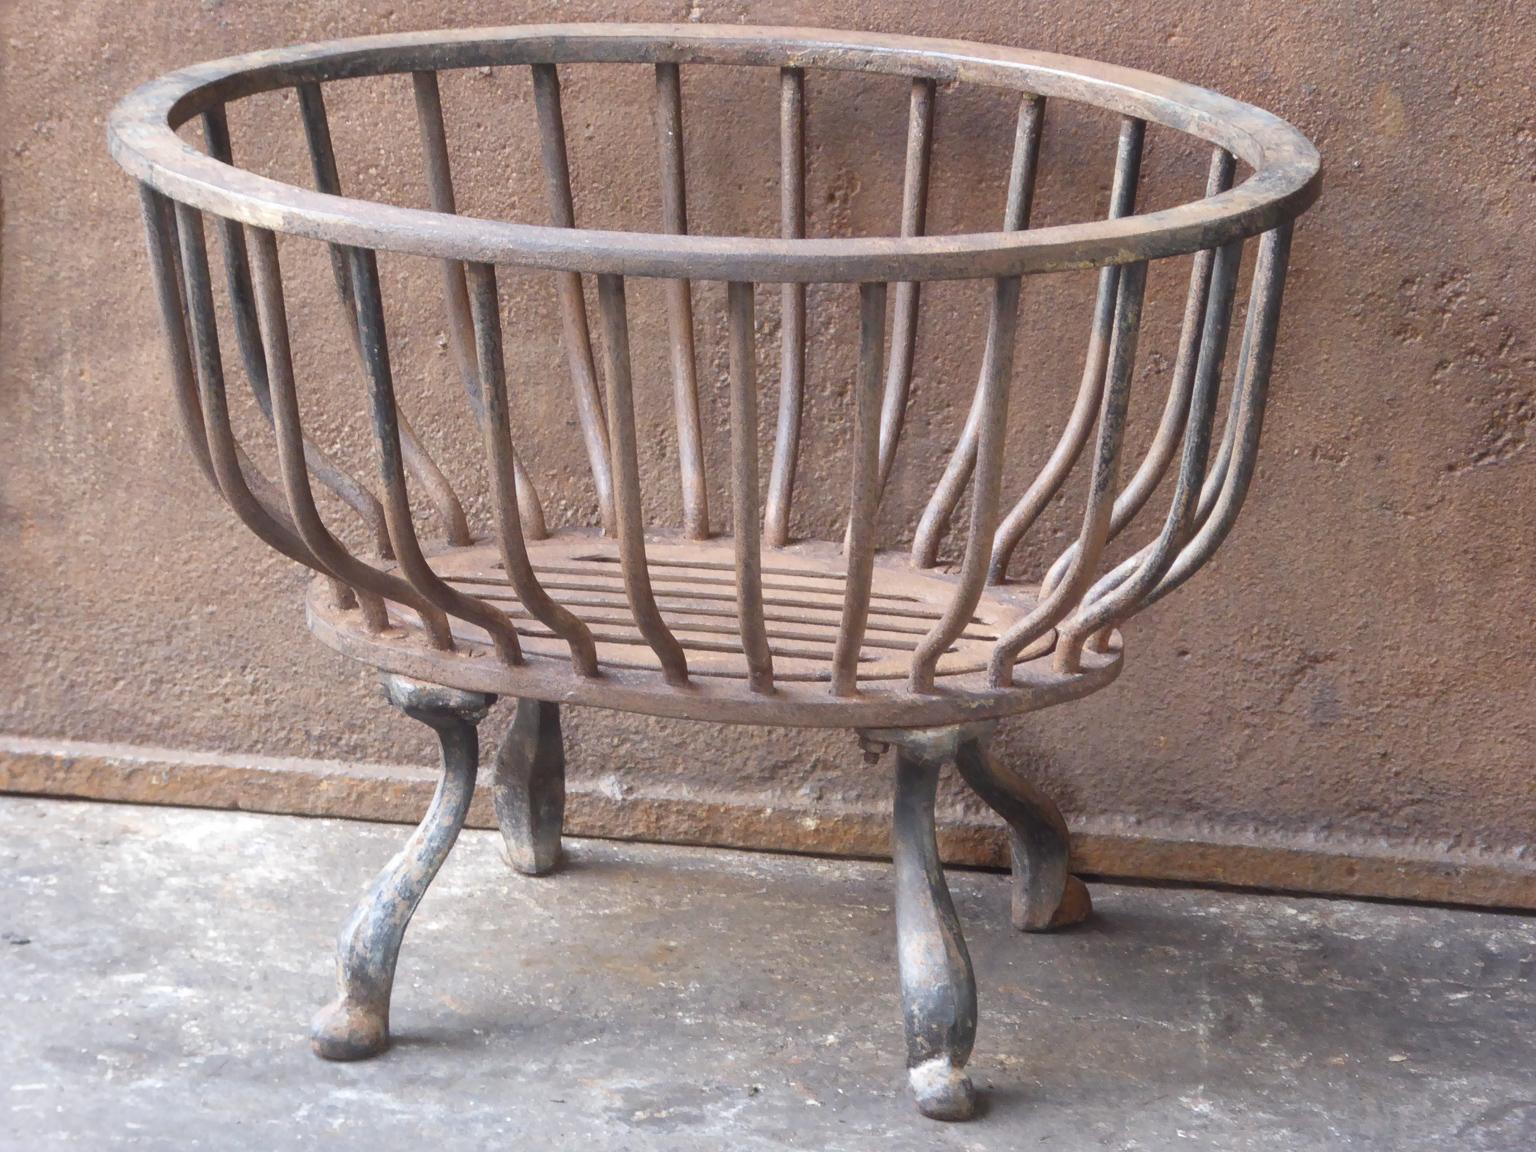 English modernist fireplace basket or fire basket. The fireplace grate is made of wrought iron. It has a natural brown patina. Upon request it can be made black.

















 